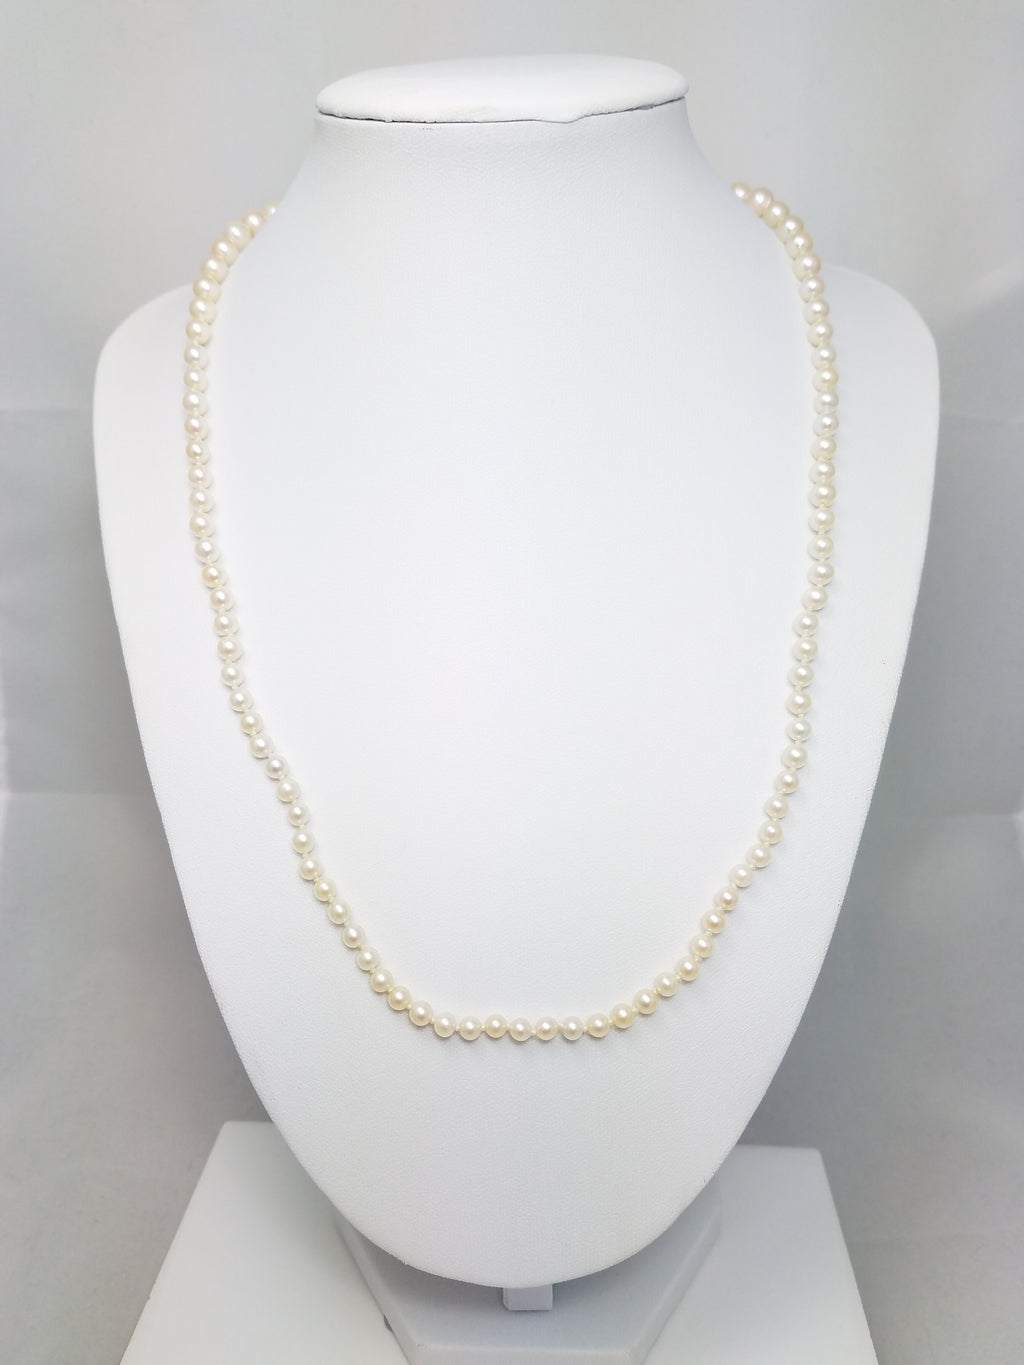 Vintage 20" 14k Yellow Gold Graduated Cultured Pearl Necklace